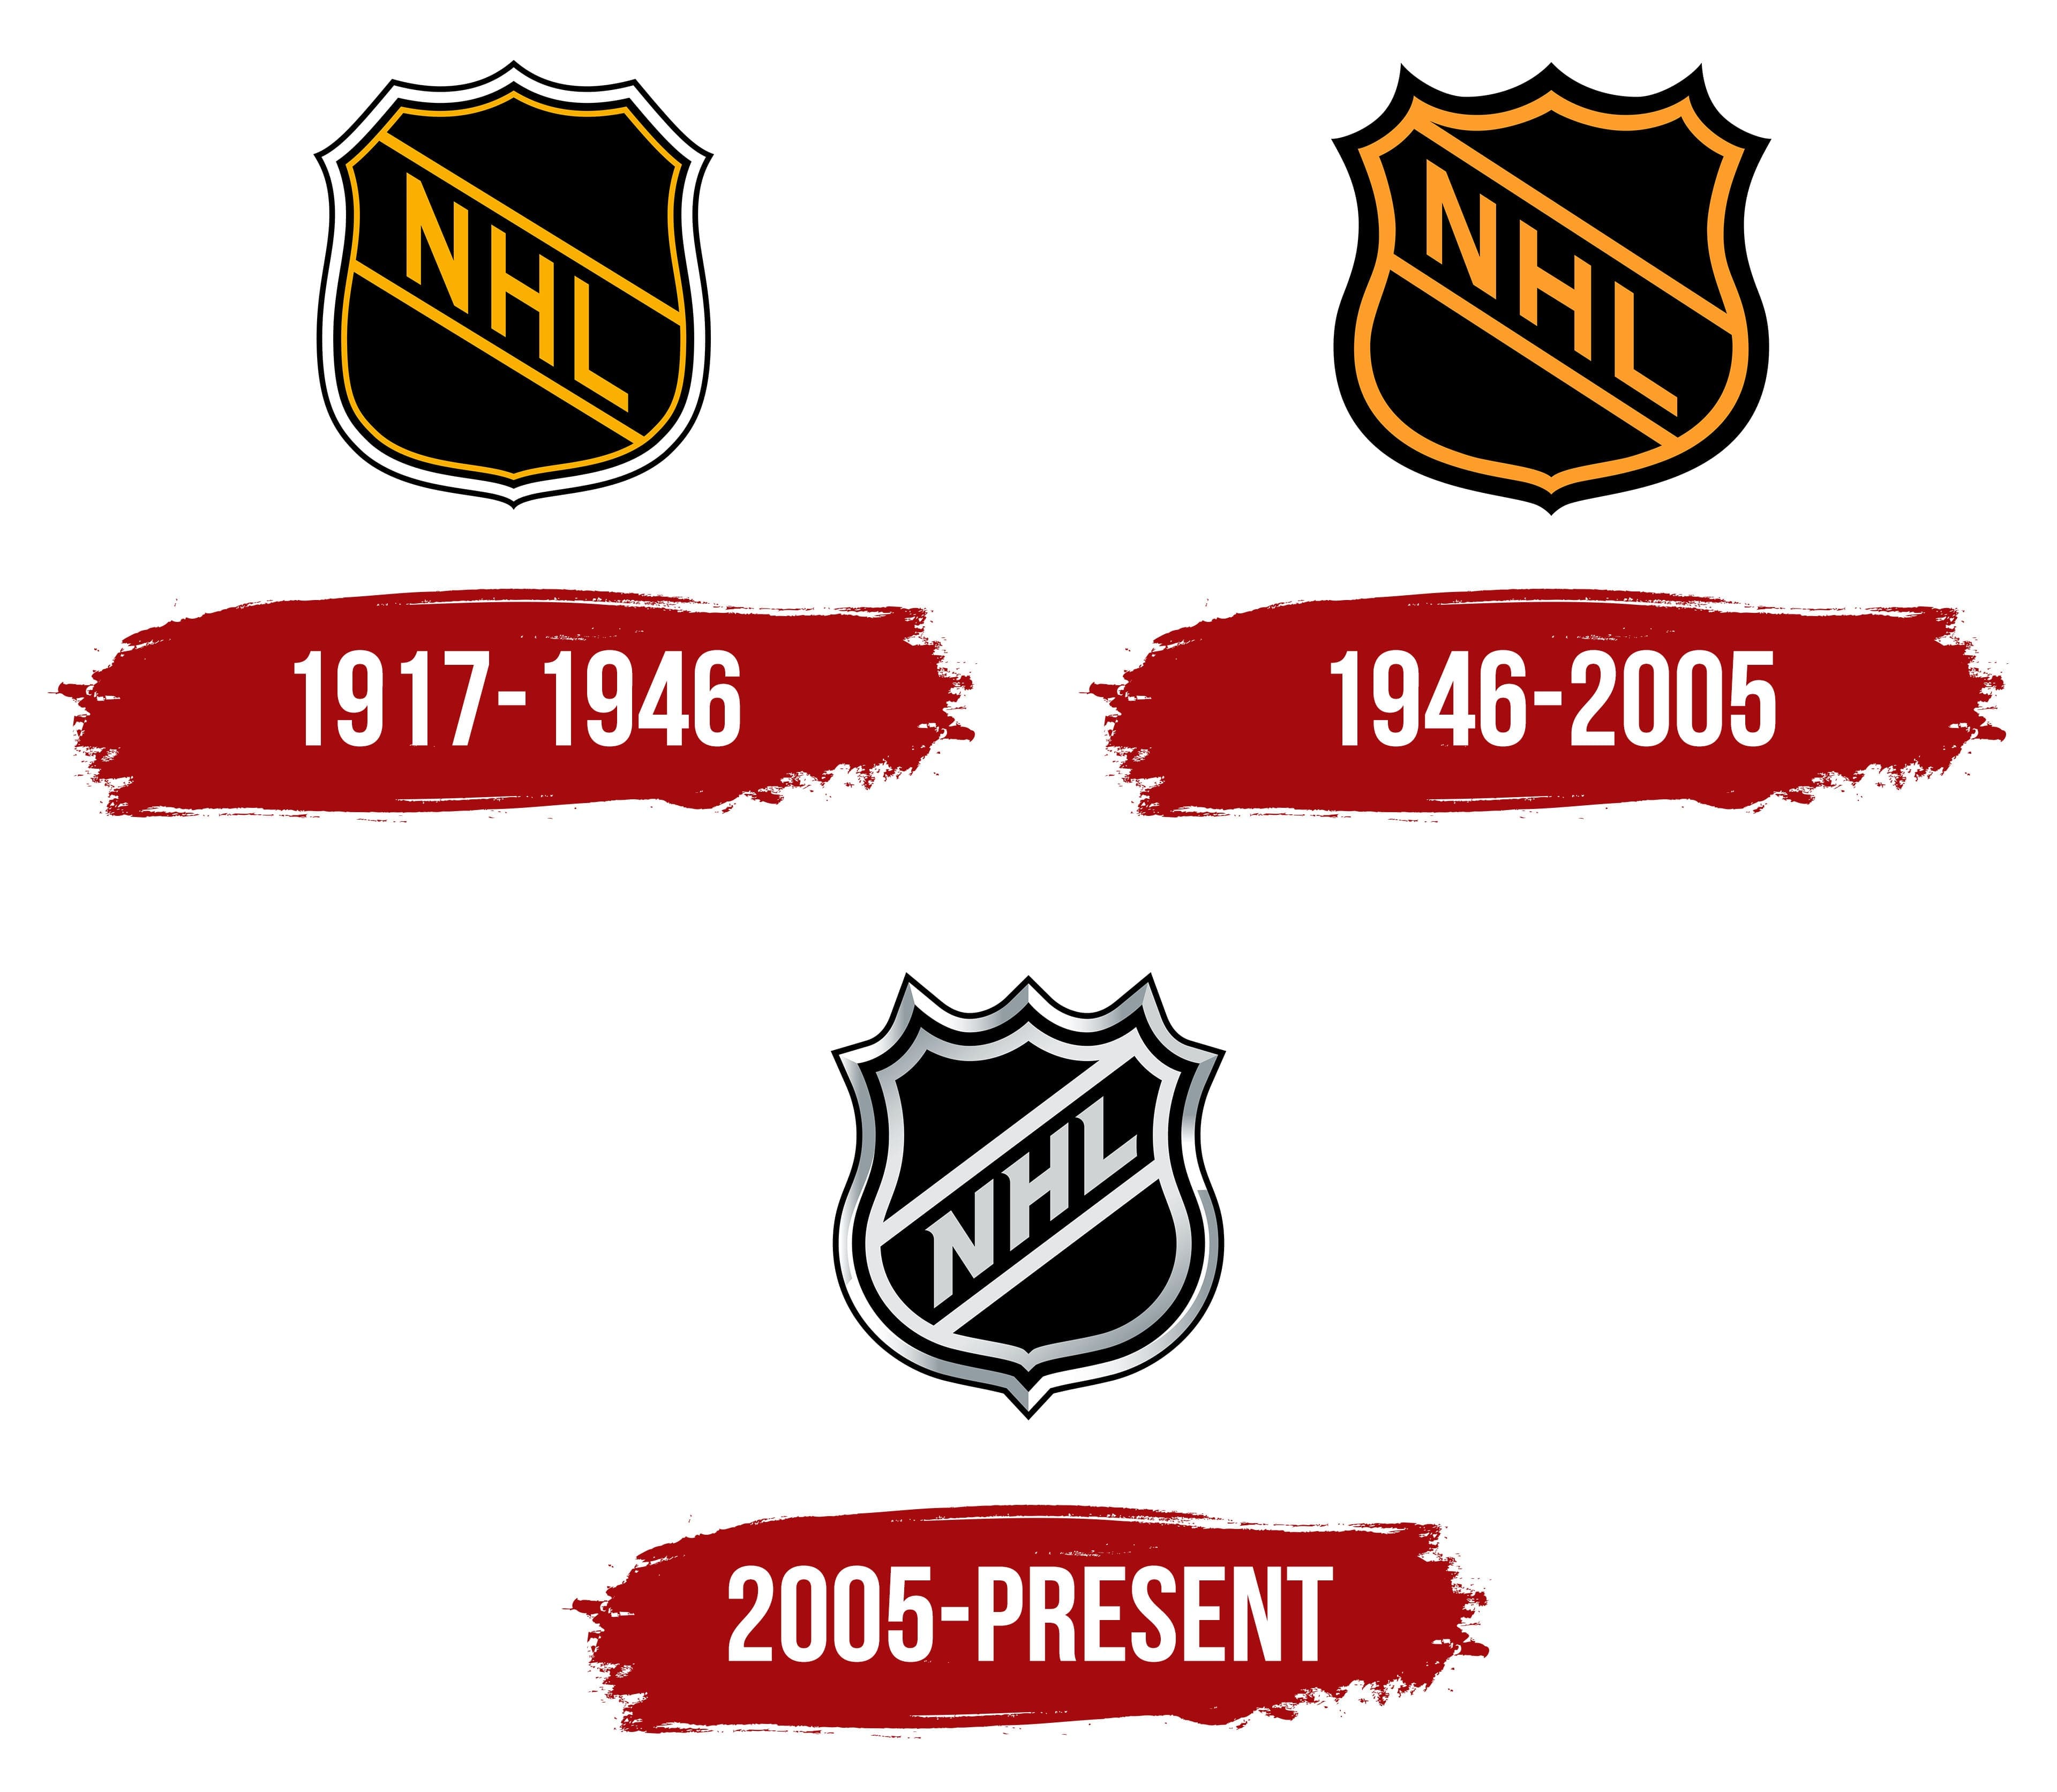 NHL logo and the history of the hockey league